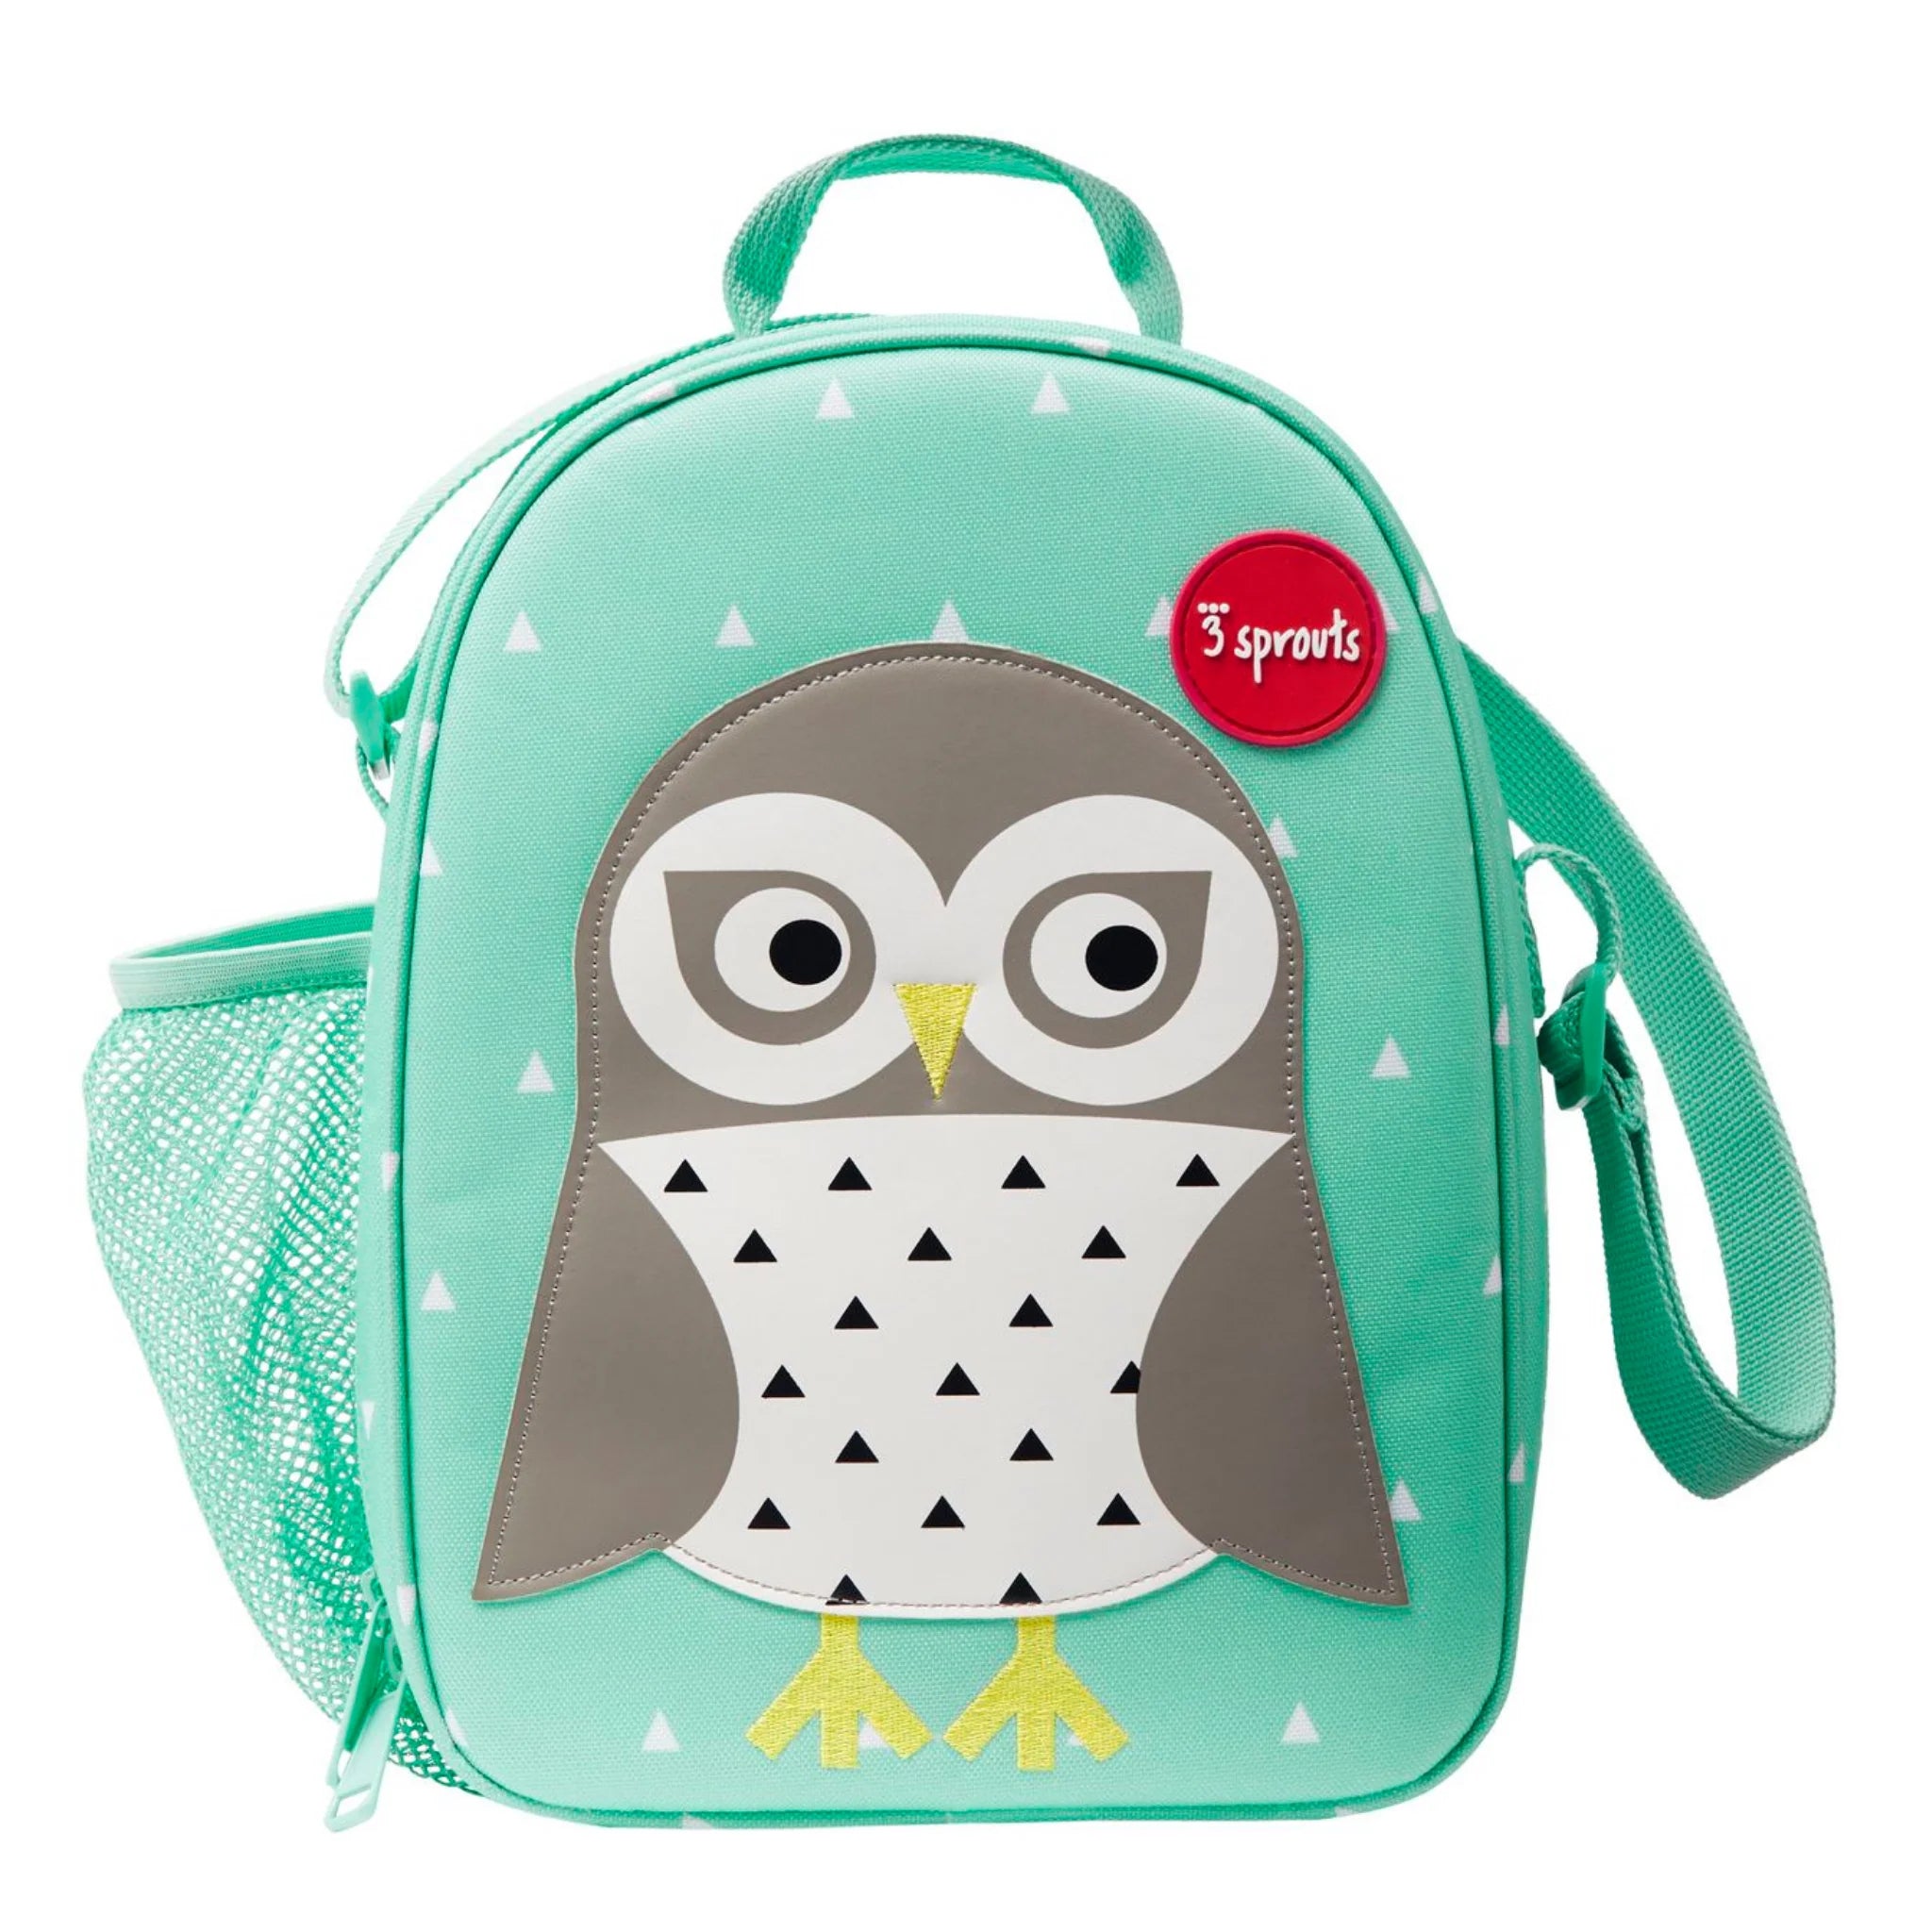 An image of Buy 3 Sprouts Kids Lunch Bag (Owl) - SmallSmart UK